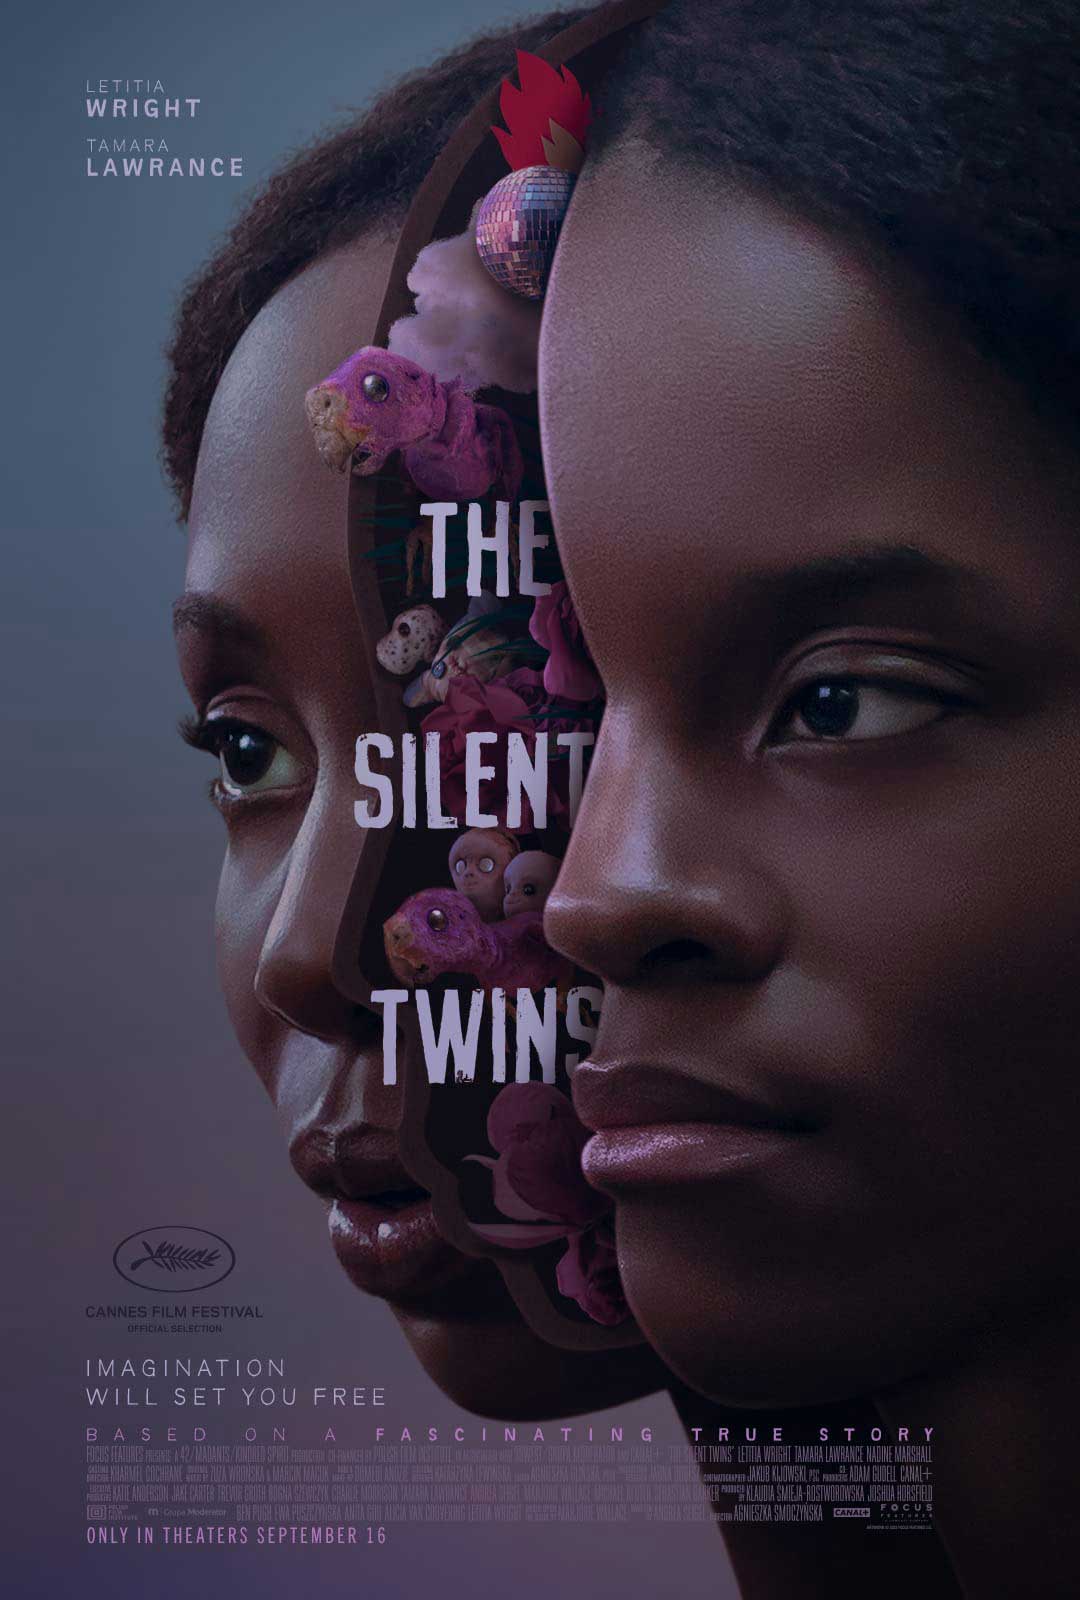 The Silent Twins Review